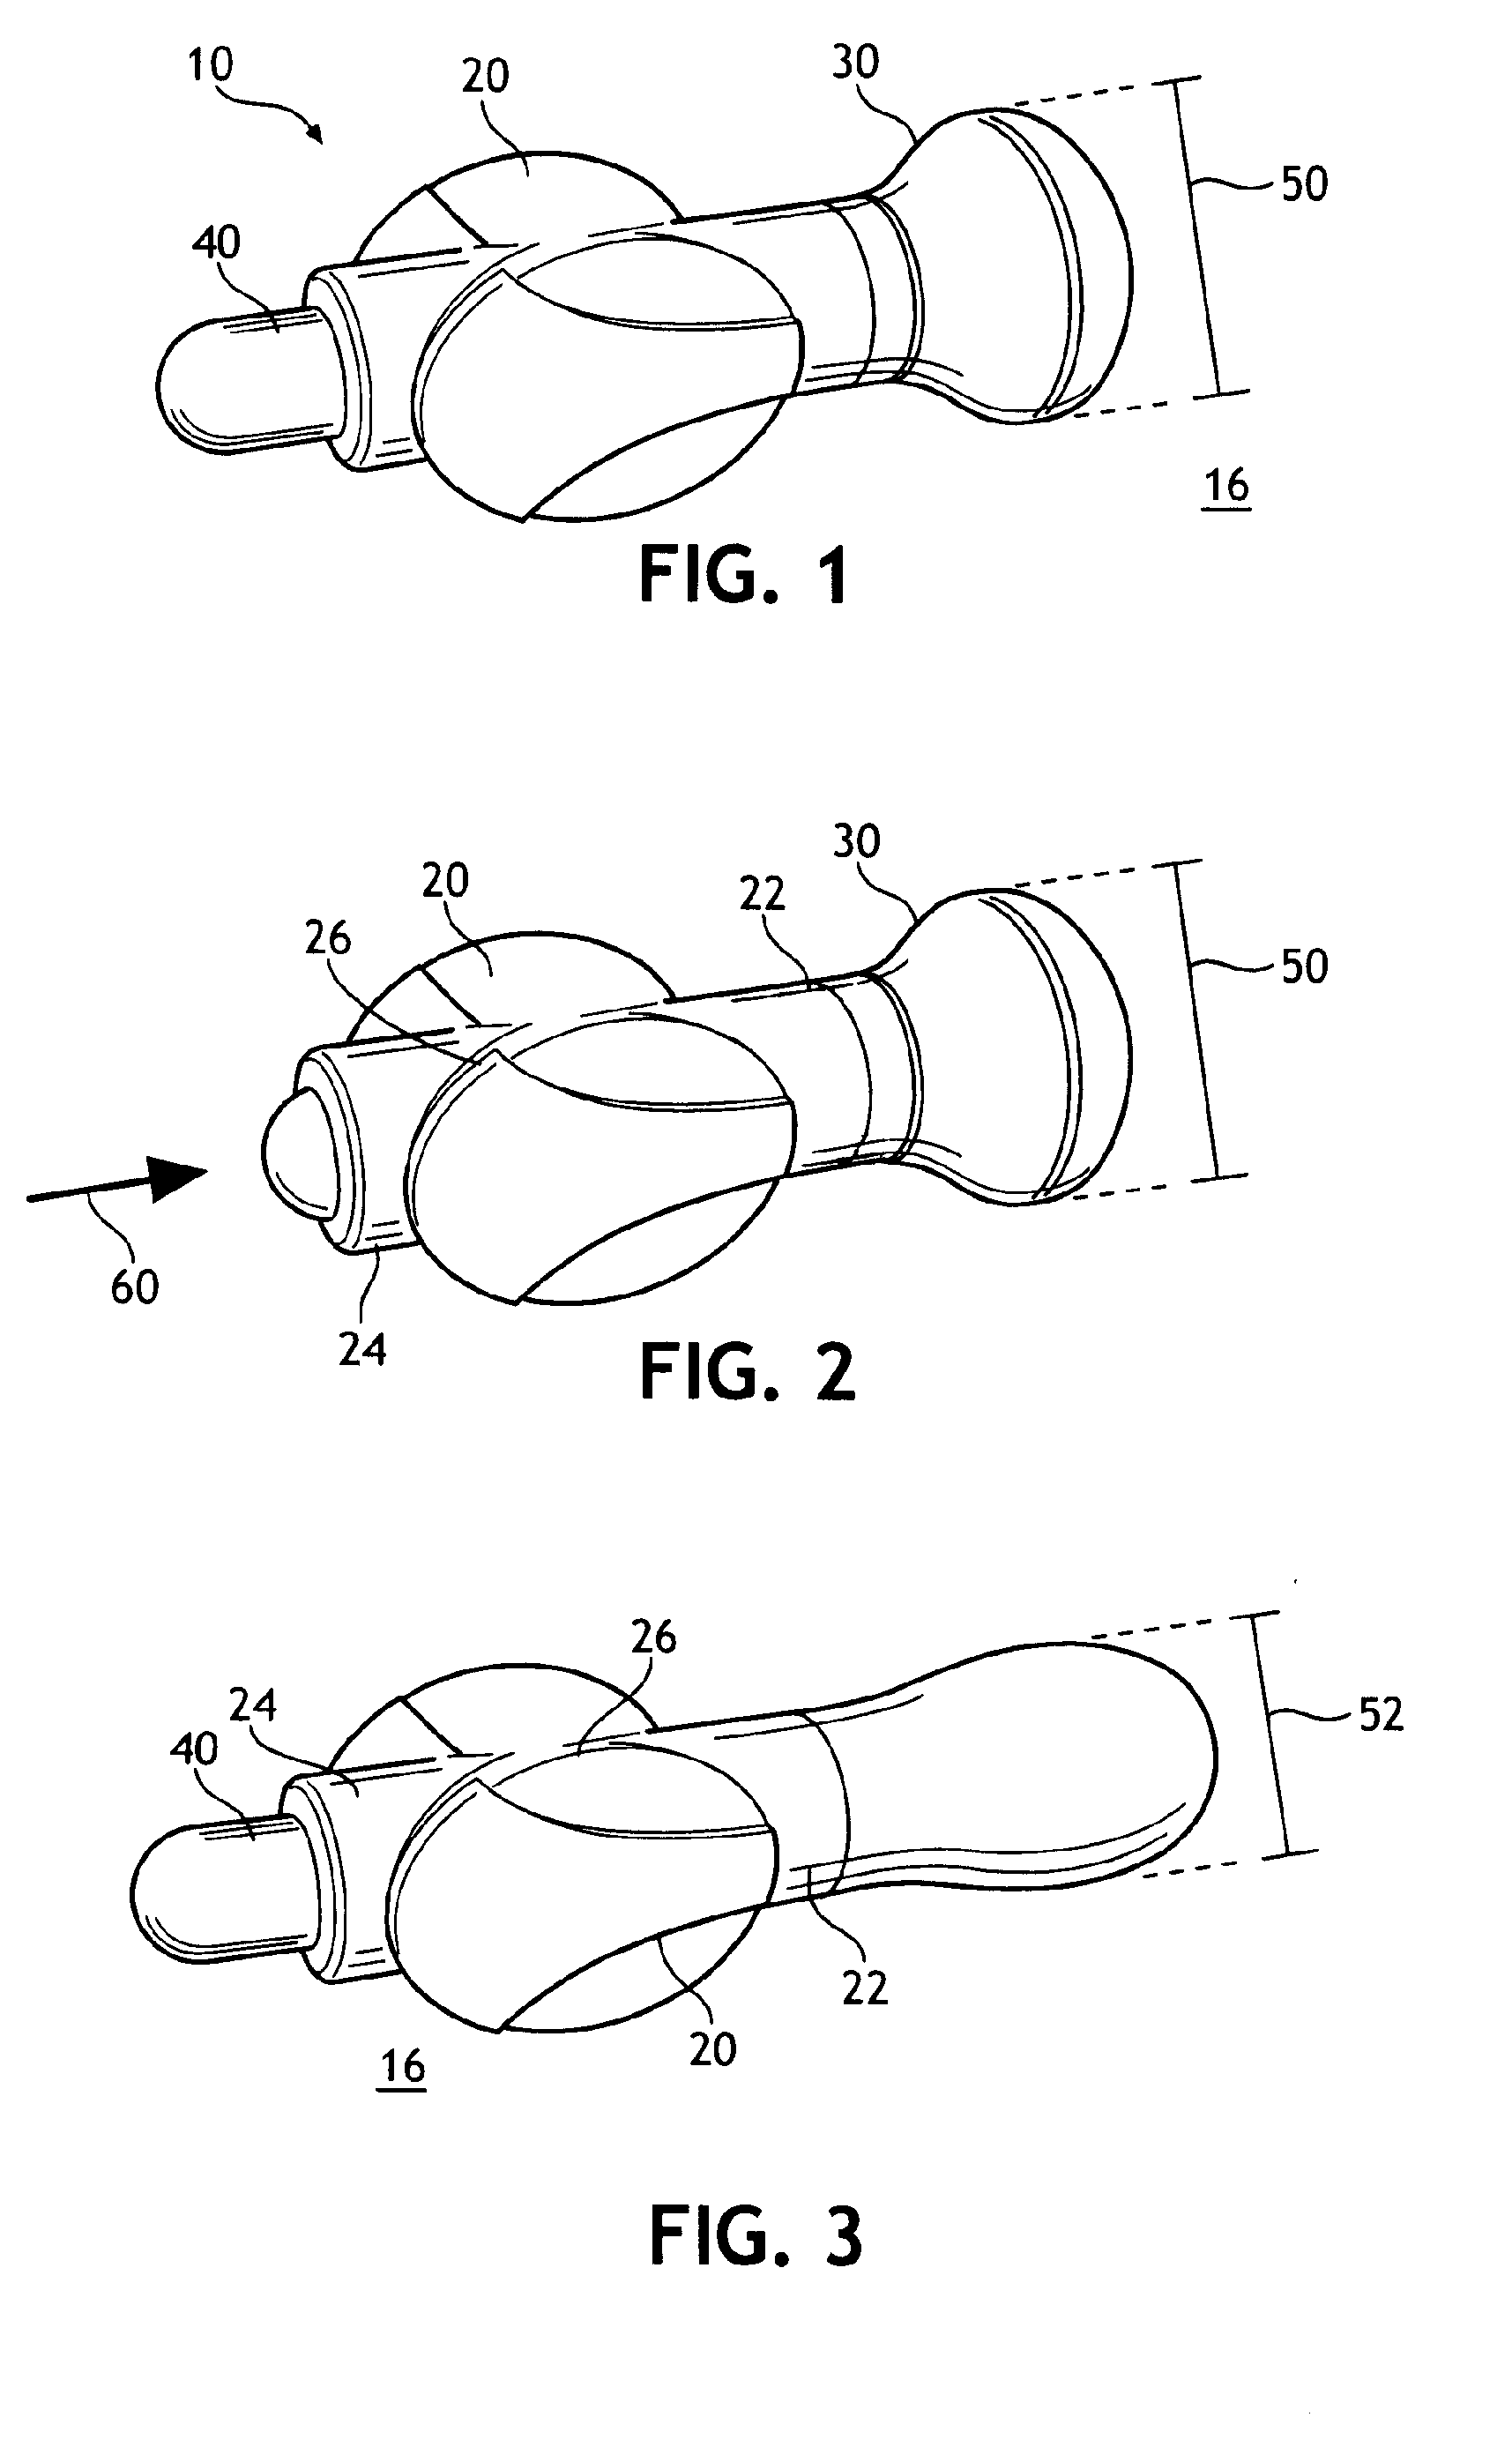 Self-fitting device for location in an ear canal